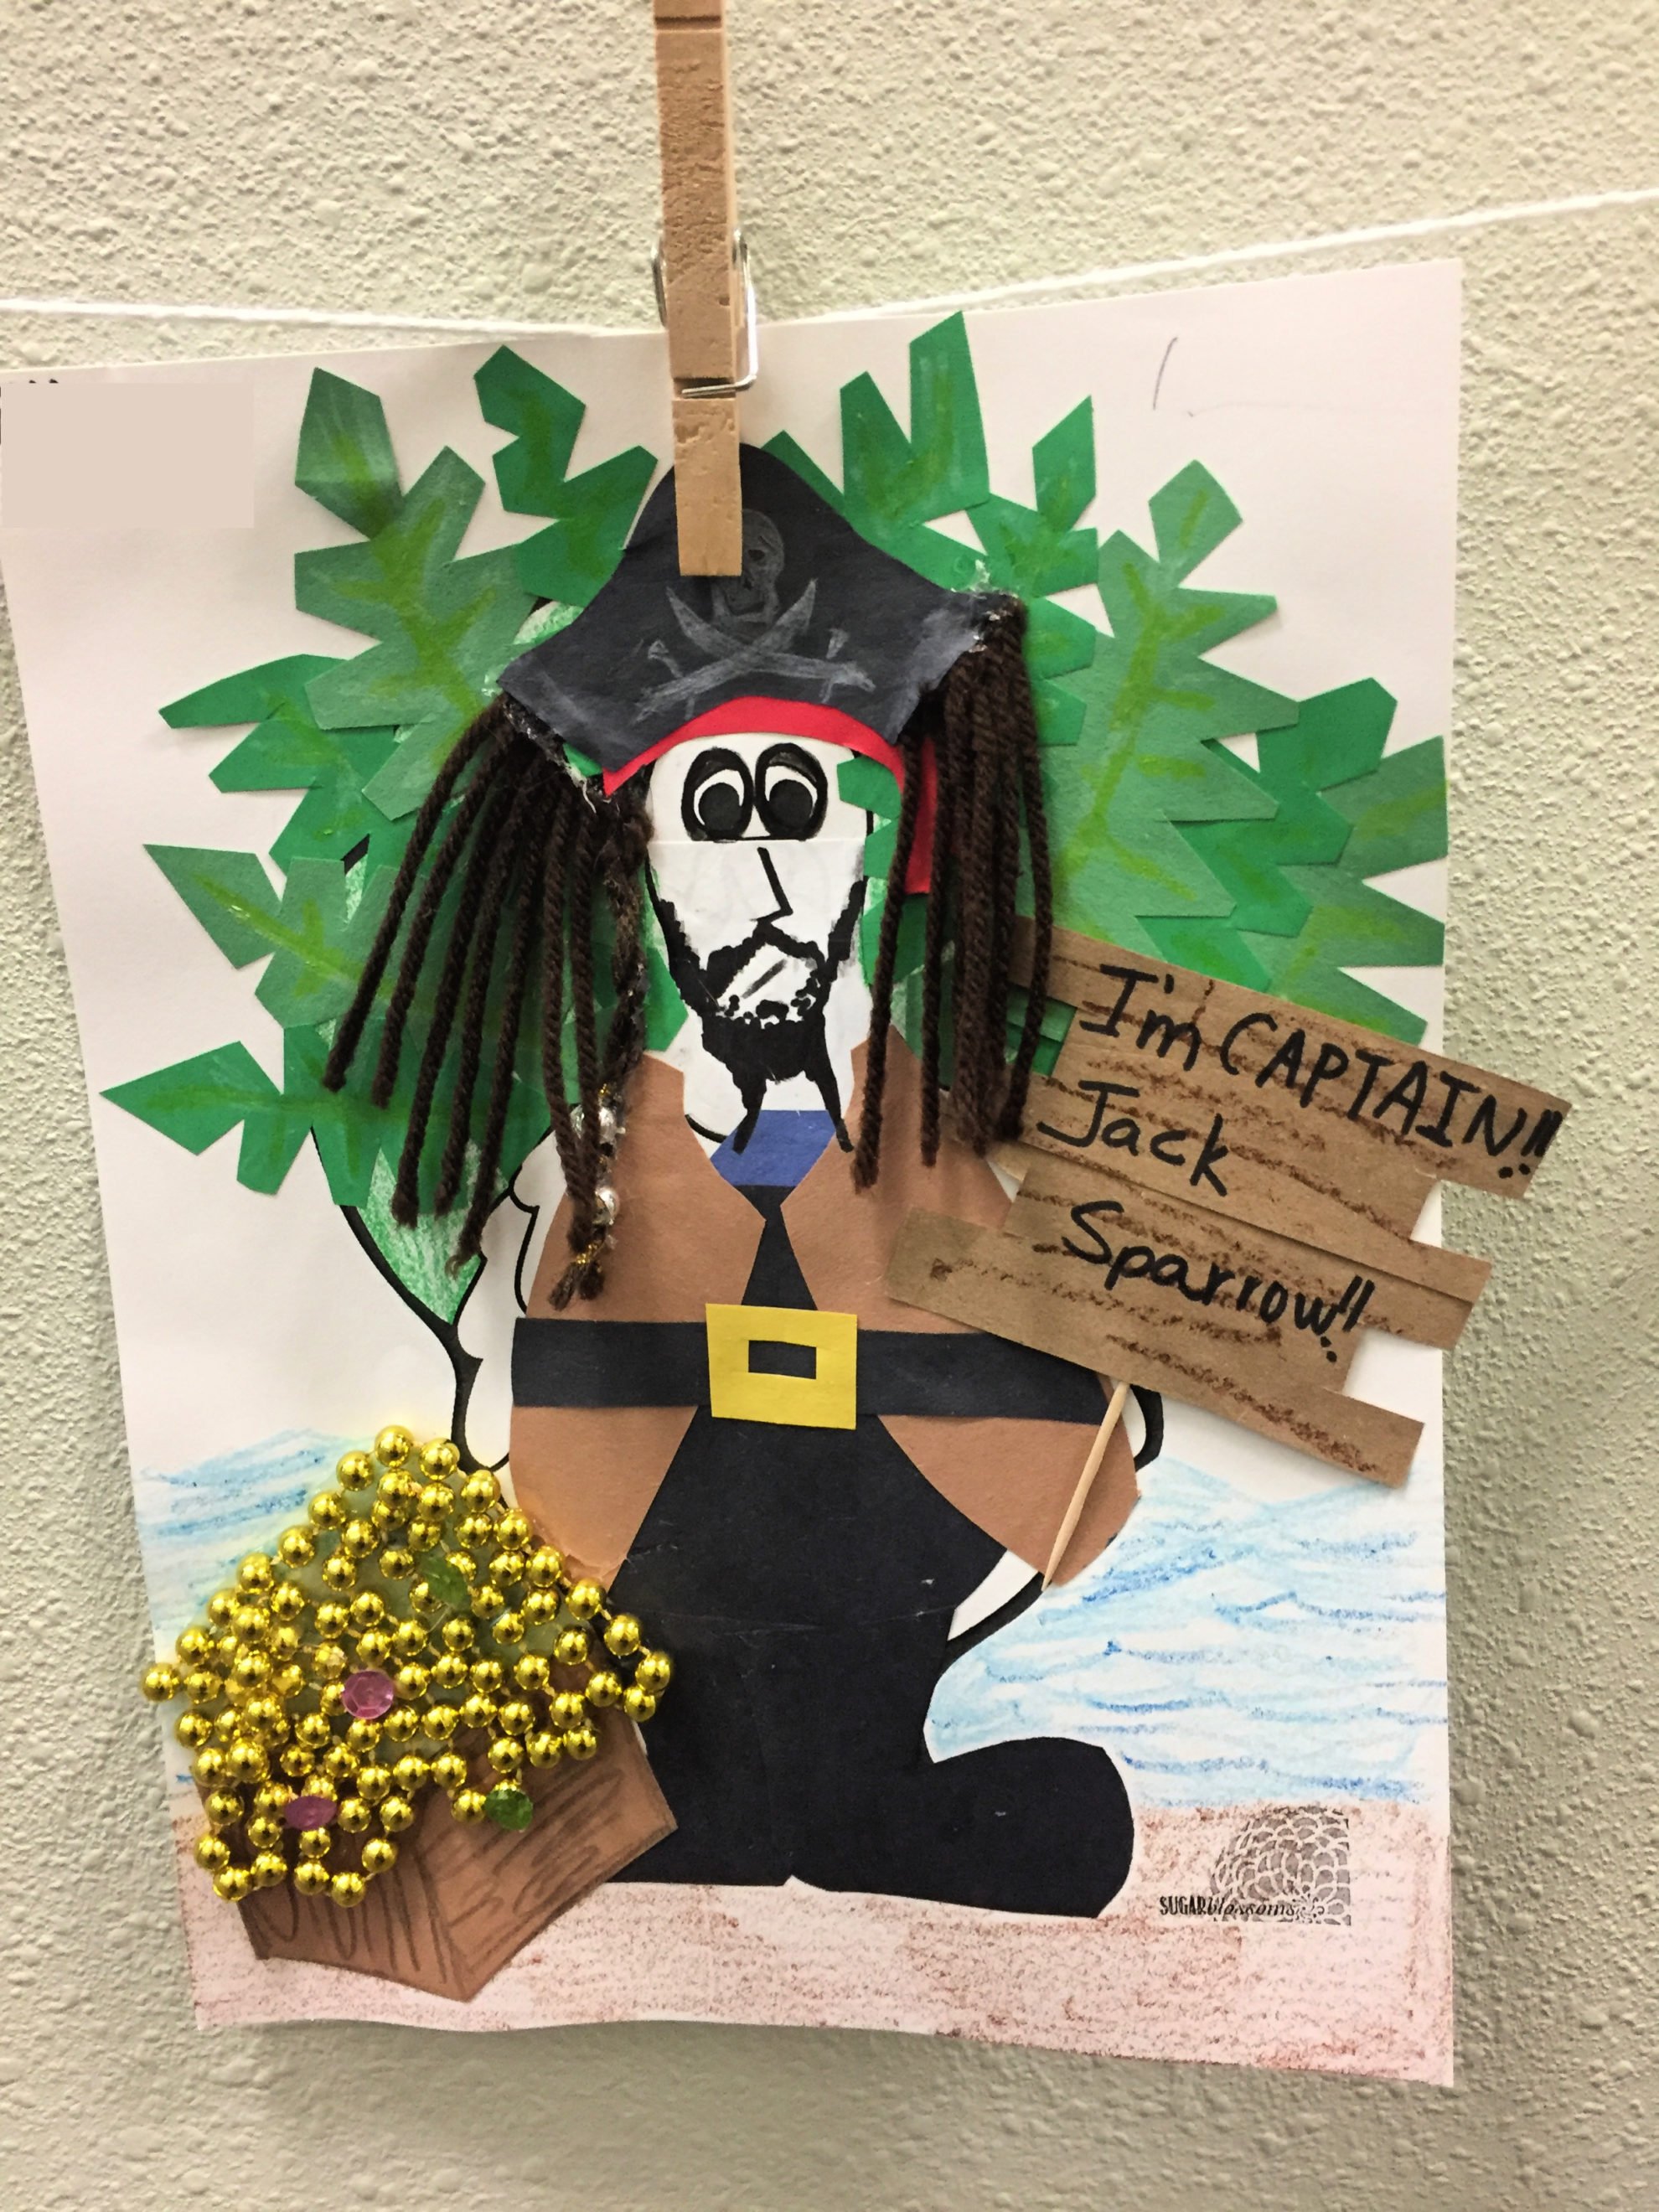 Paper Turkey In Disguise dressed as Jack Sparrow with yarn hair, construction paper clothing, and beads for treasure.